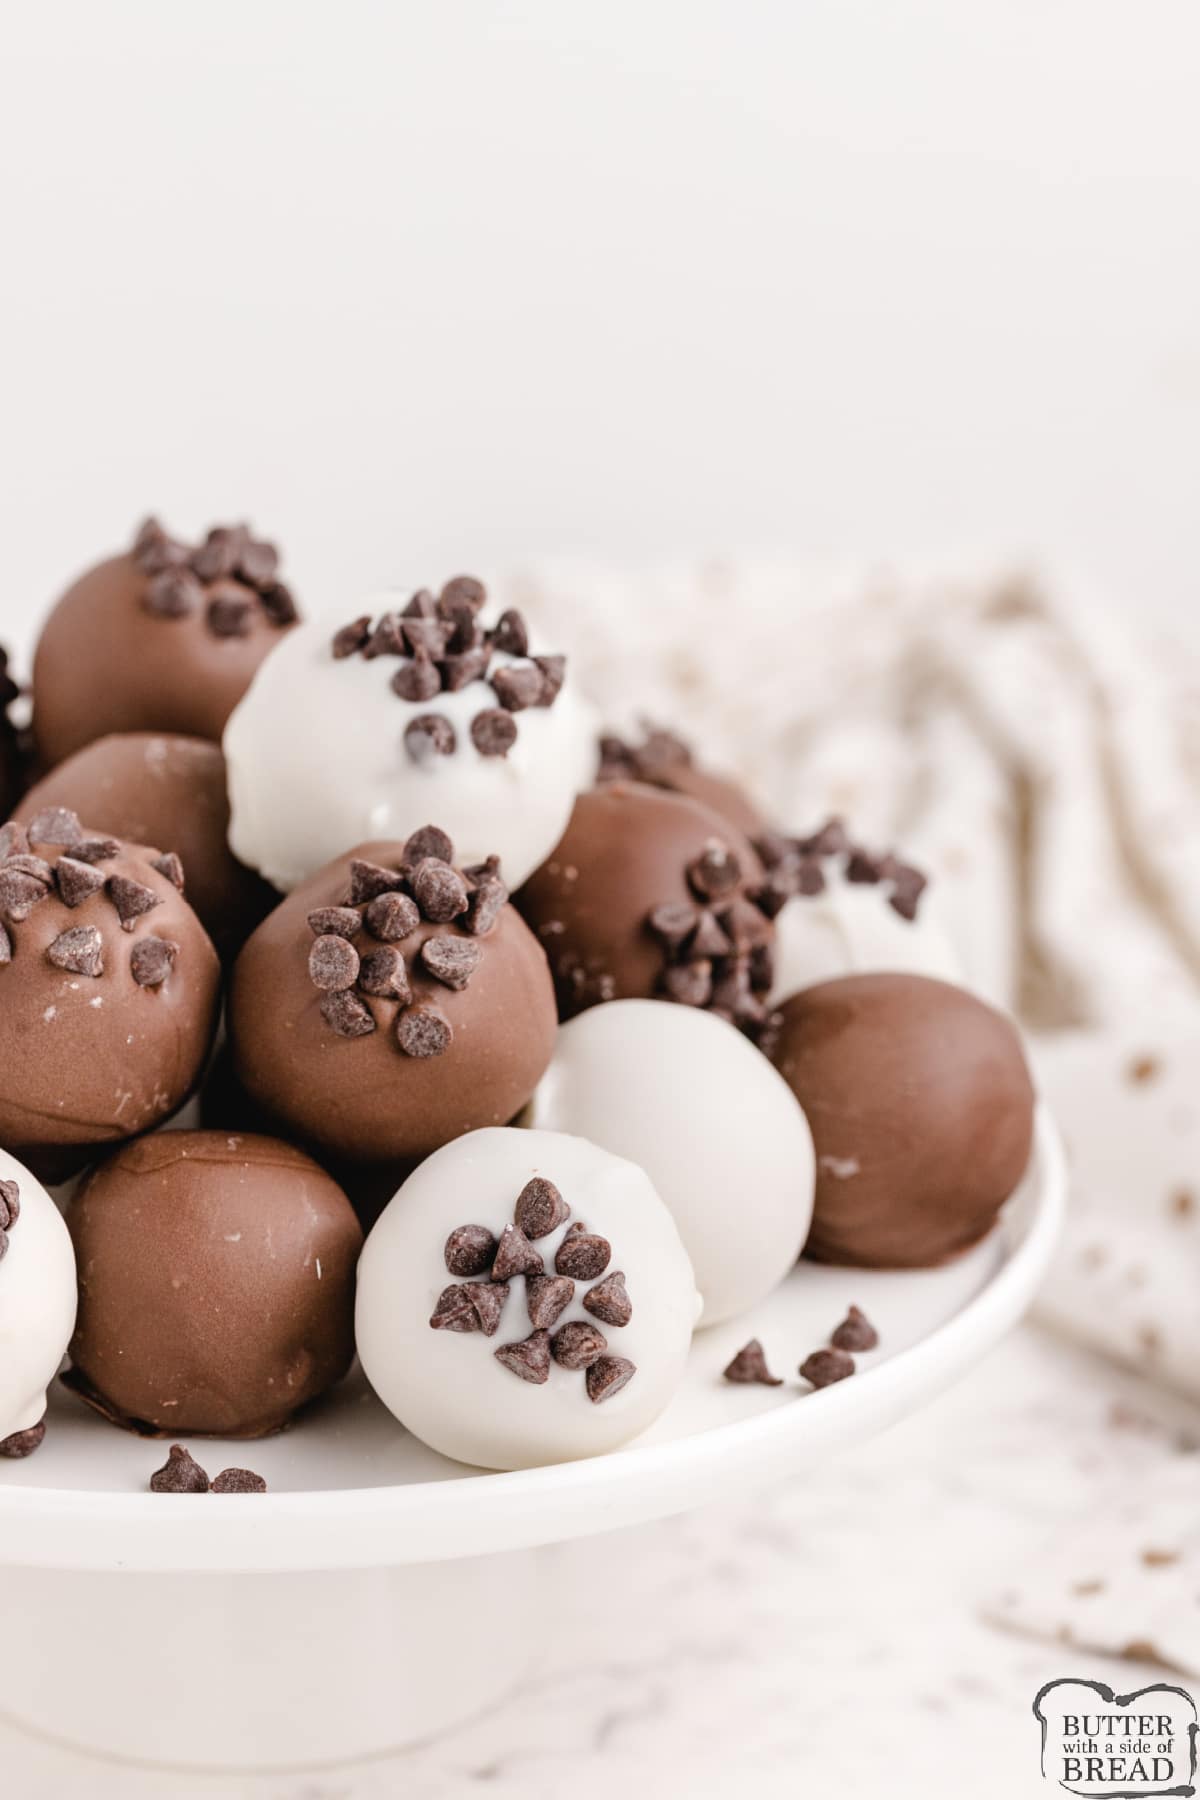 Edible cookie dough balls dipped in chocolate 